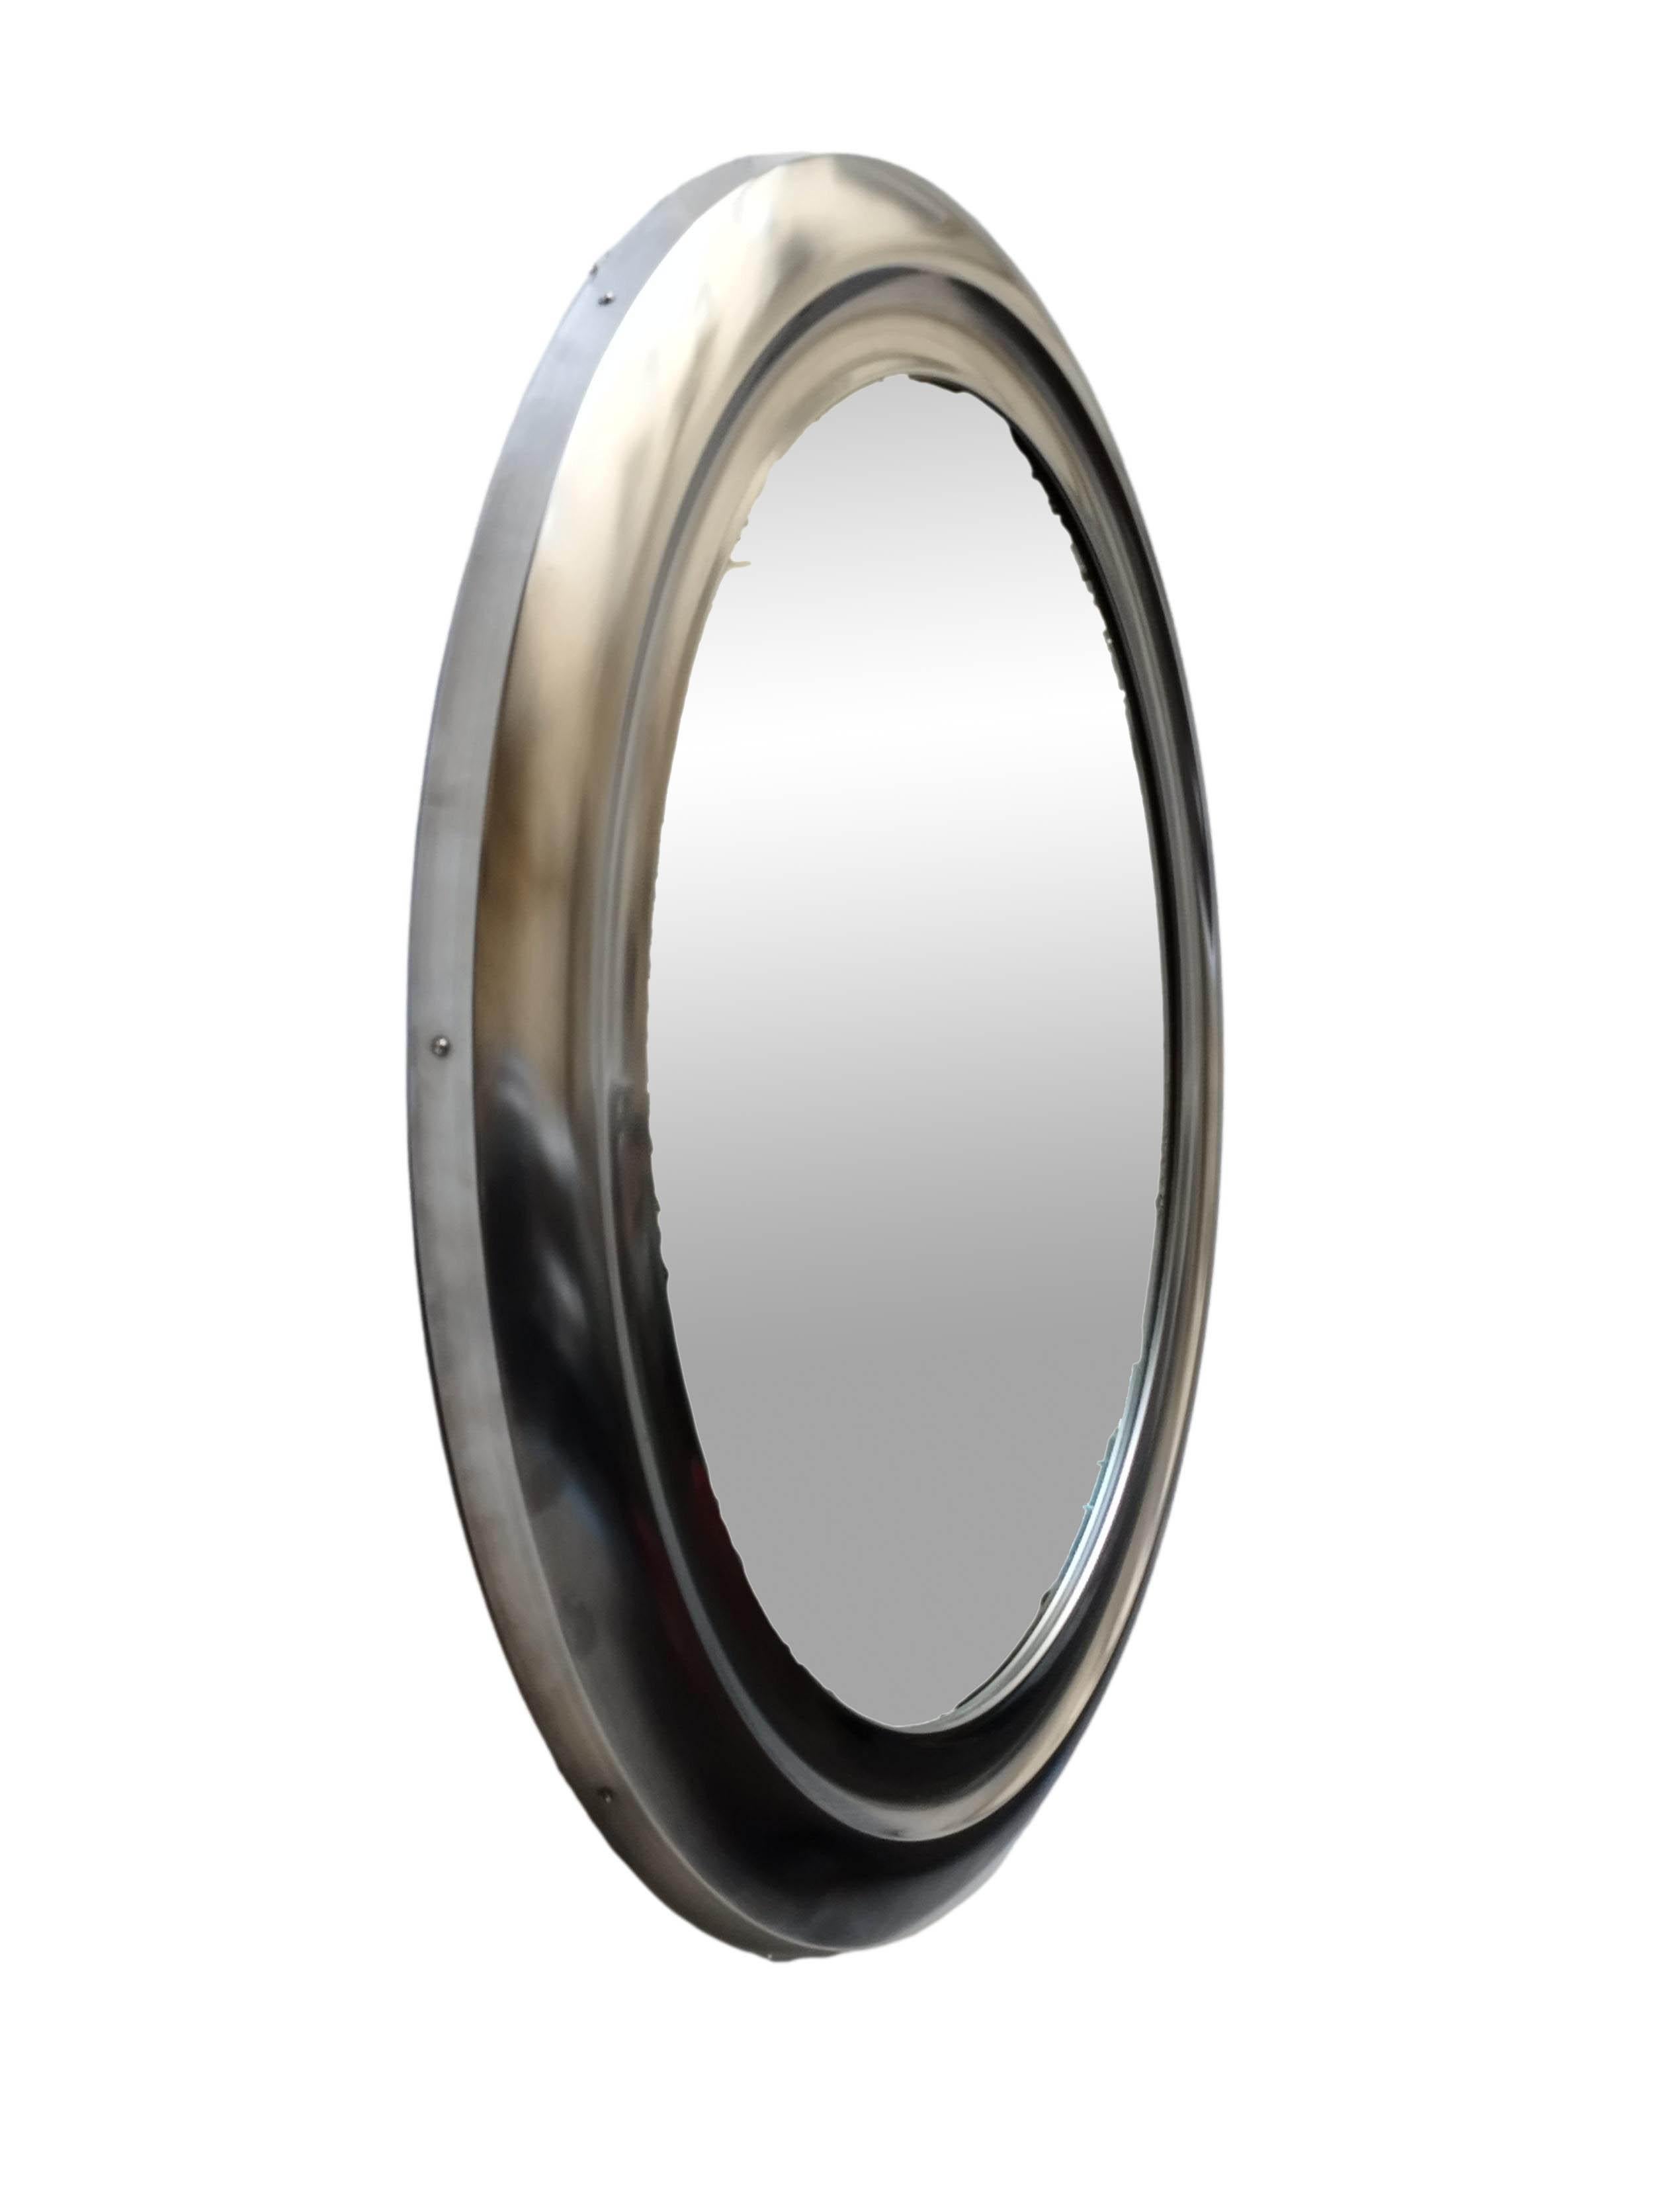 Beautiful circular wall mirror with aluminum edge, Made in Italy around 1960.
The large round shape and aluminum edge give the piece a modern and pleasing style.